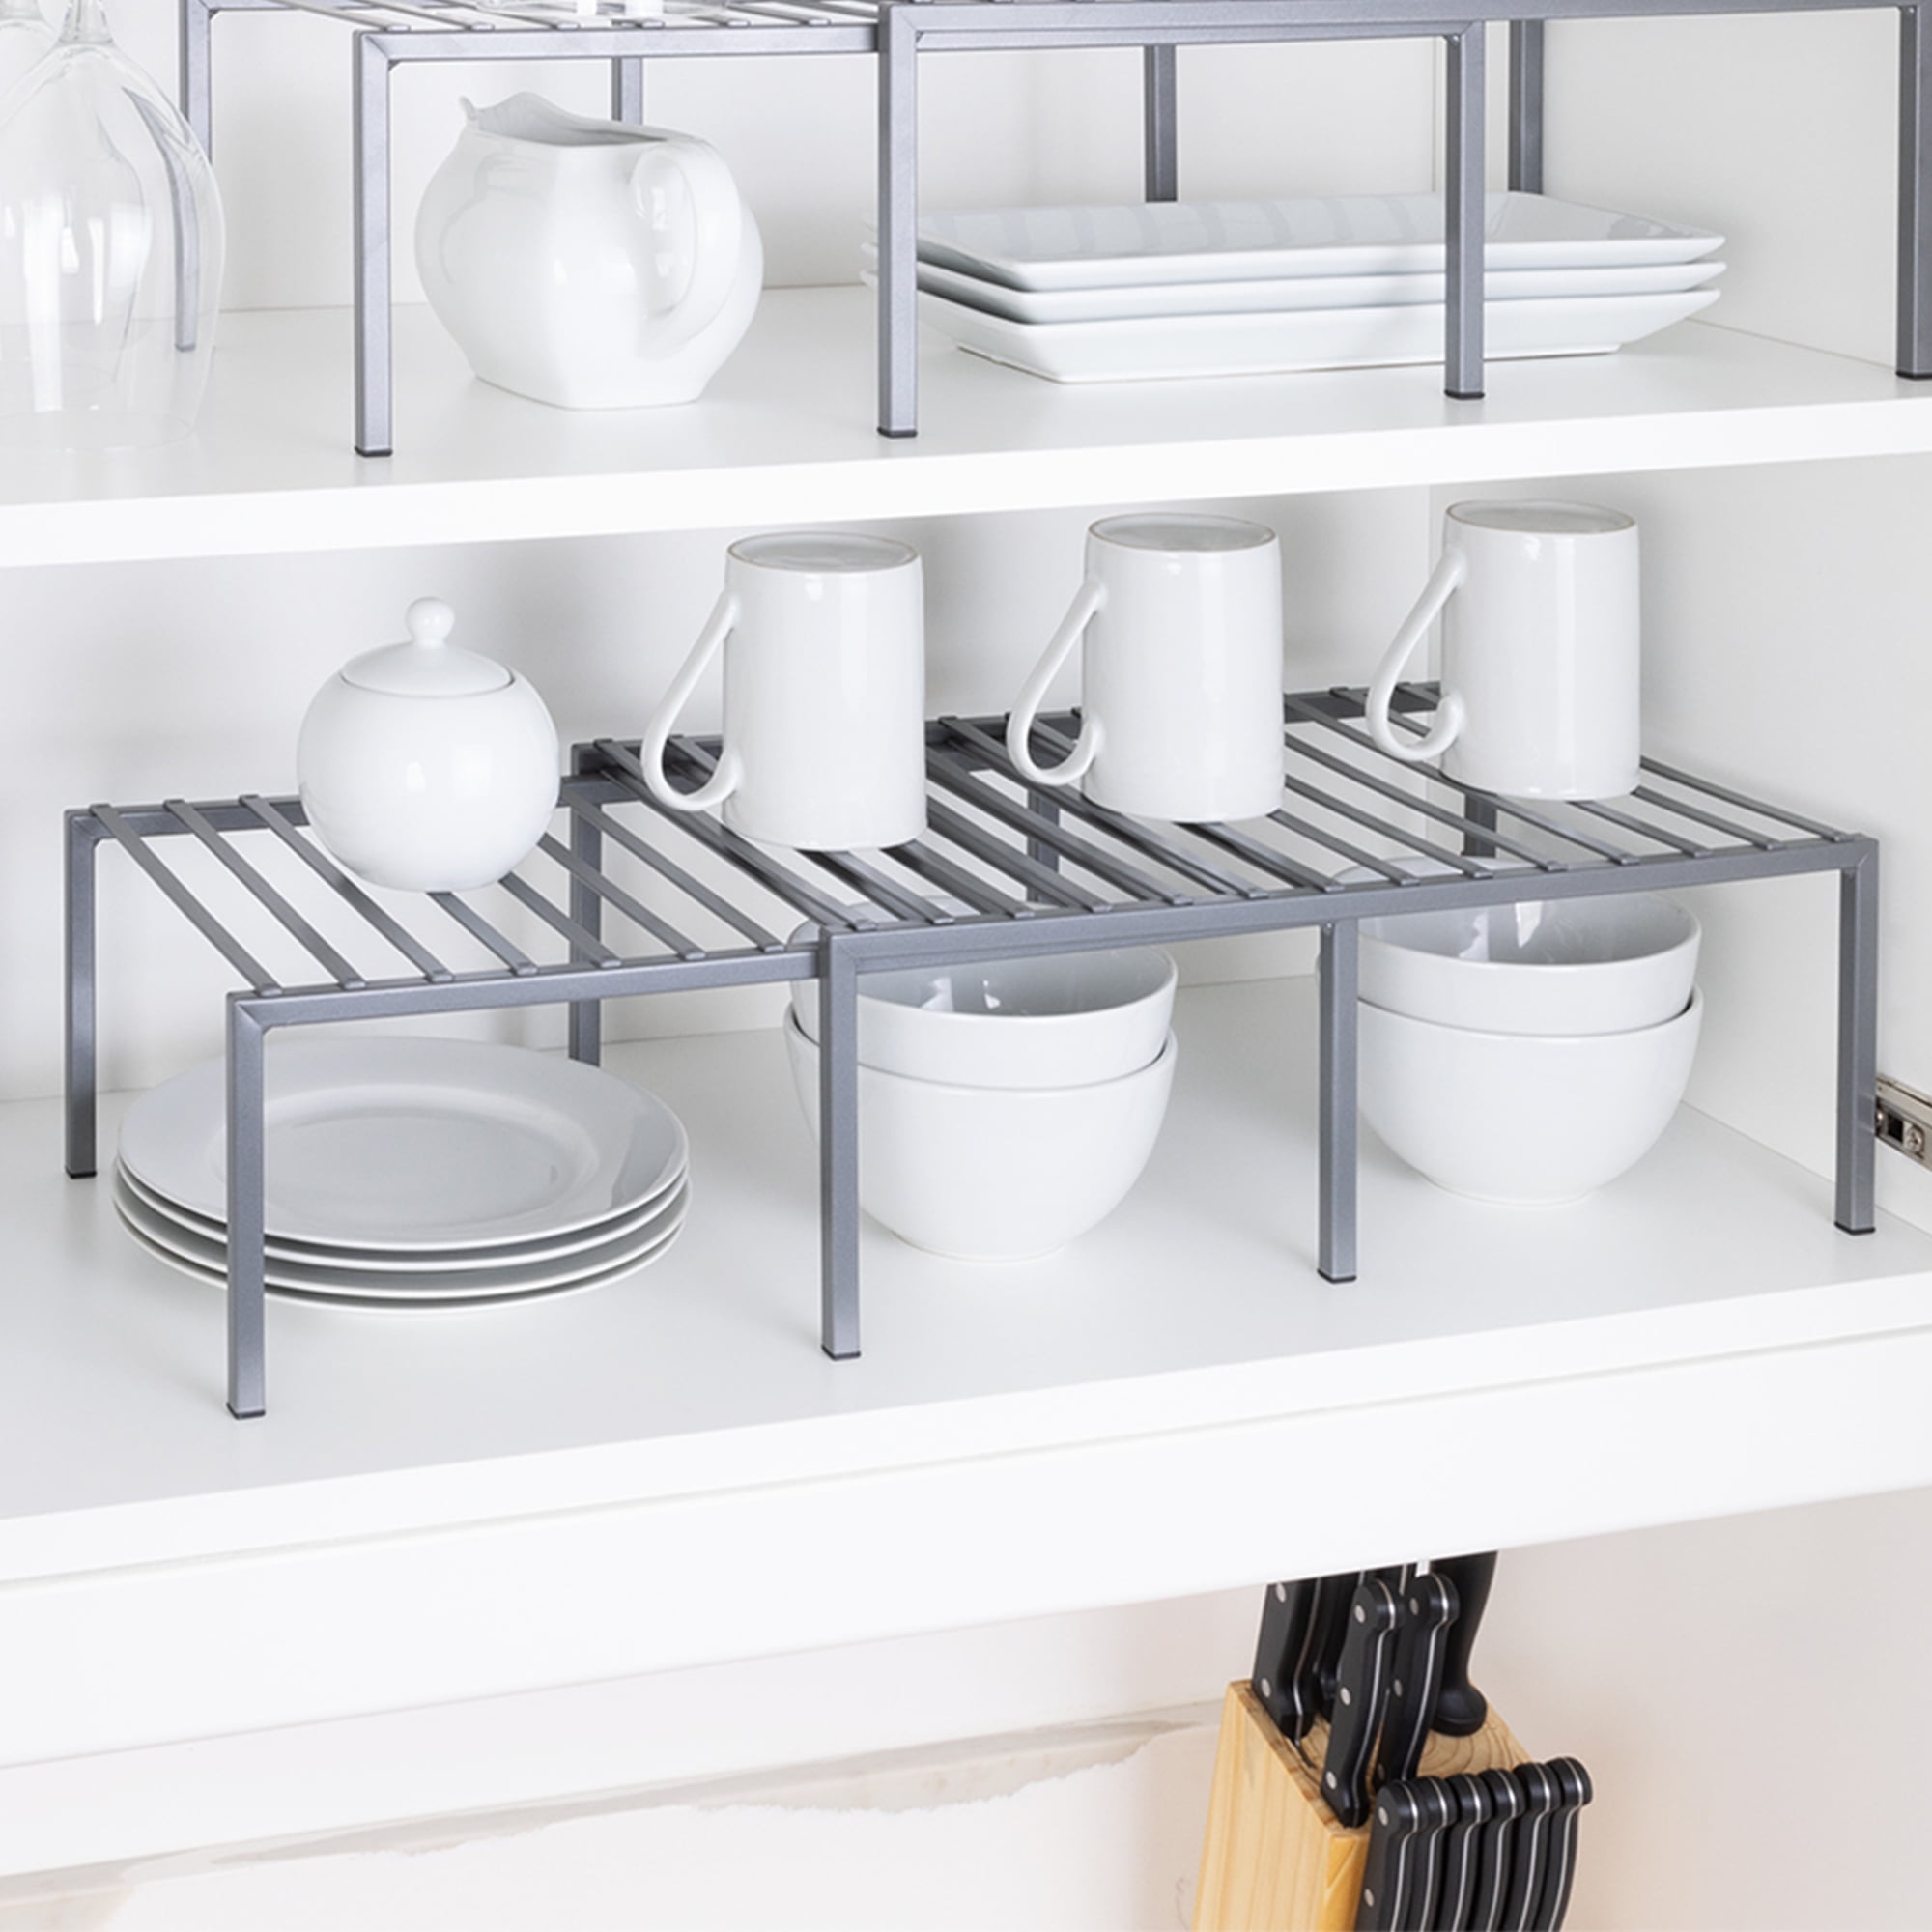 Smart Design's Expandable Shelf Rack Doubled My Cabinet Space